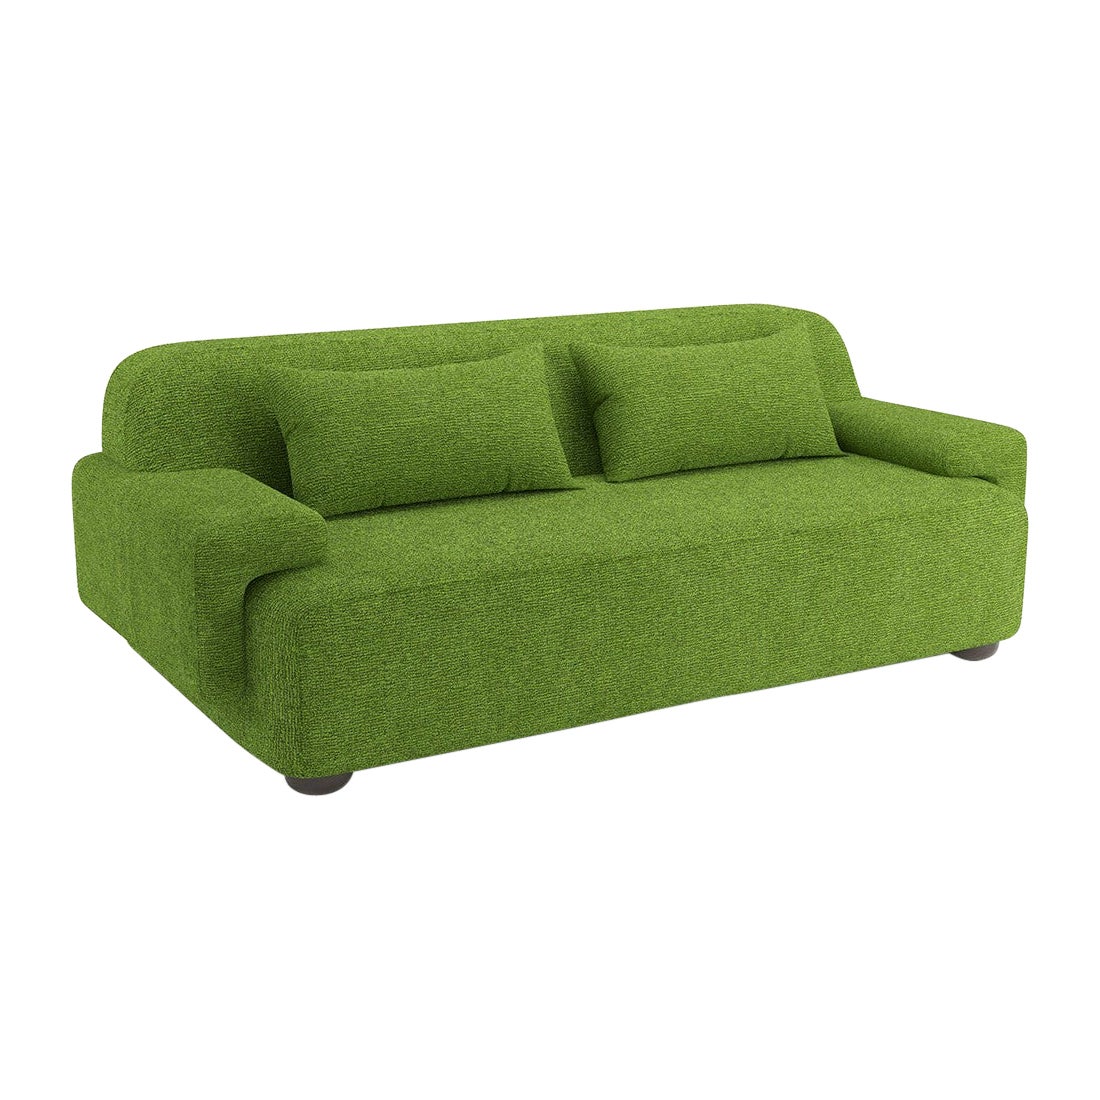 Popus Editions Lena 2.5 Seater Sofa in Grass Megeve Fabric with Knit Effect For Sale